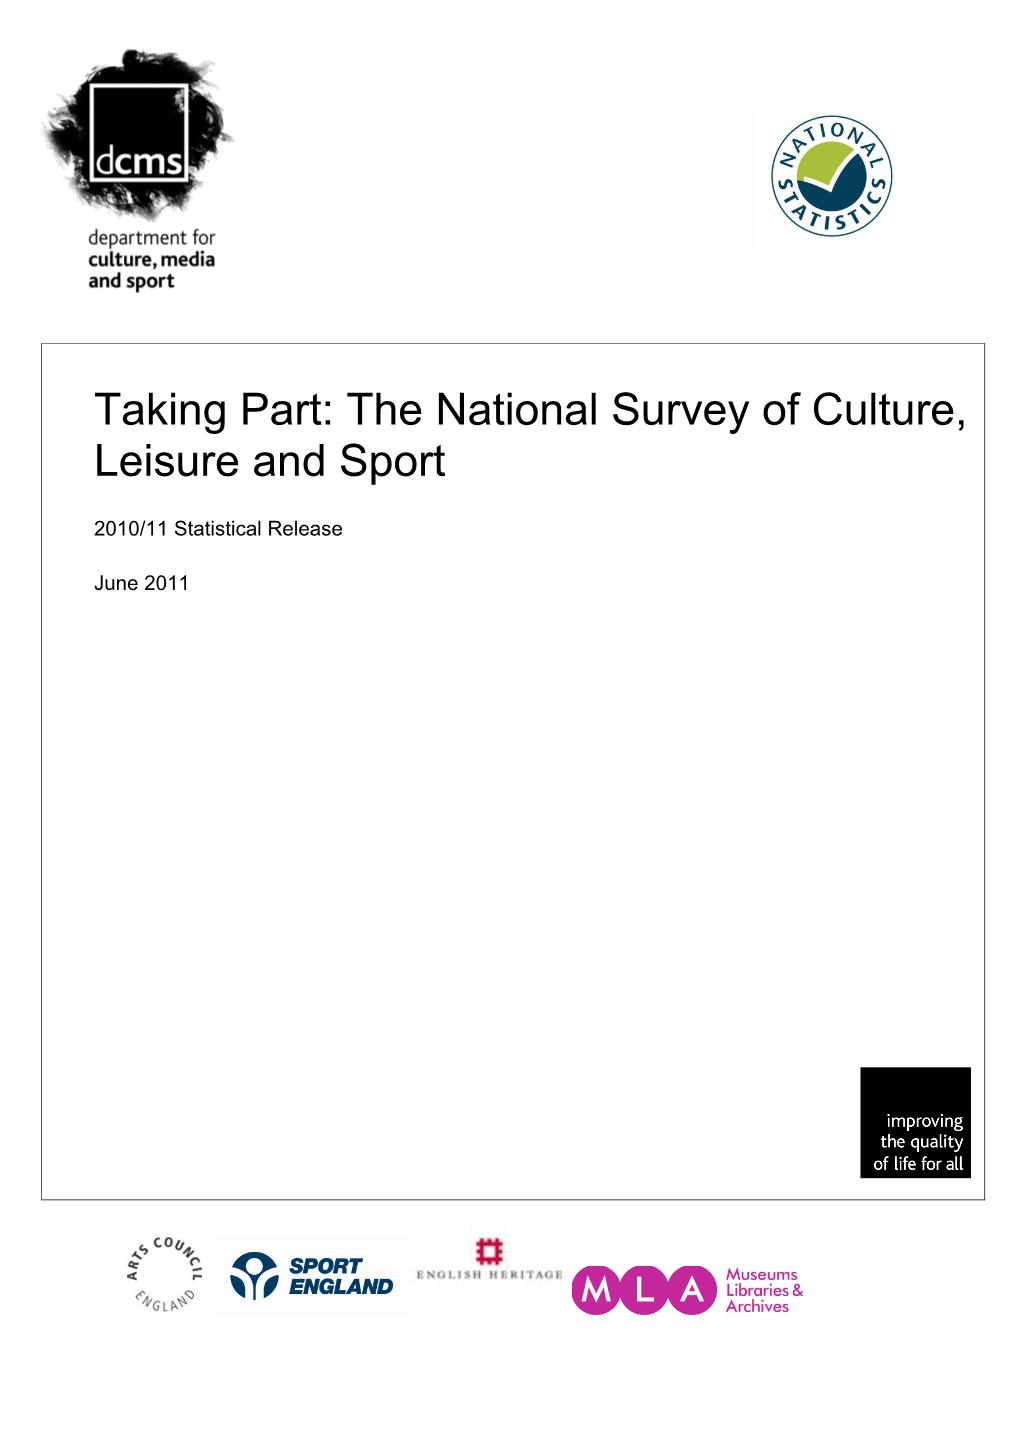 Taking Part: the National Survey of Culture, Leisure and Sport for 2010/2011